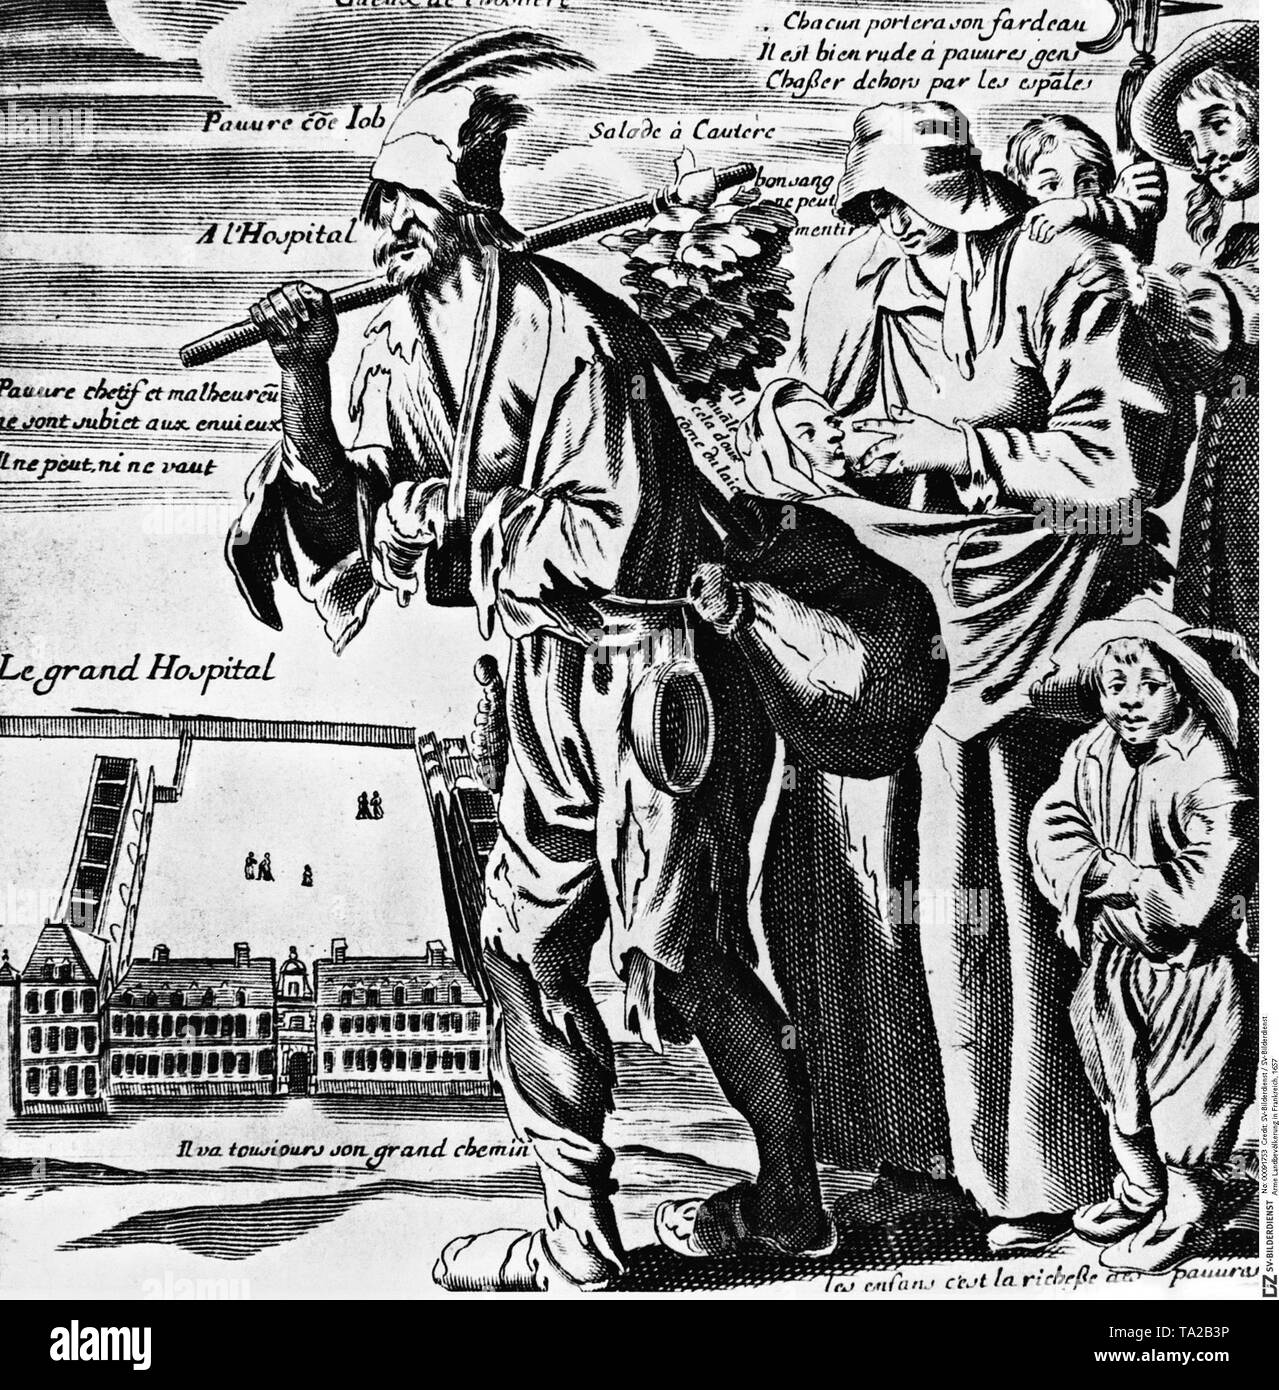 The contemporary engraving depicts an impoverished peasant family. The man carries his injured arm in a sling. In the background there is a hospital. Stock Photo